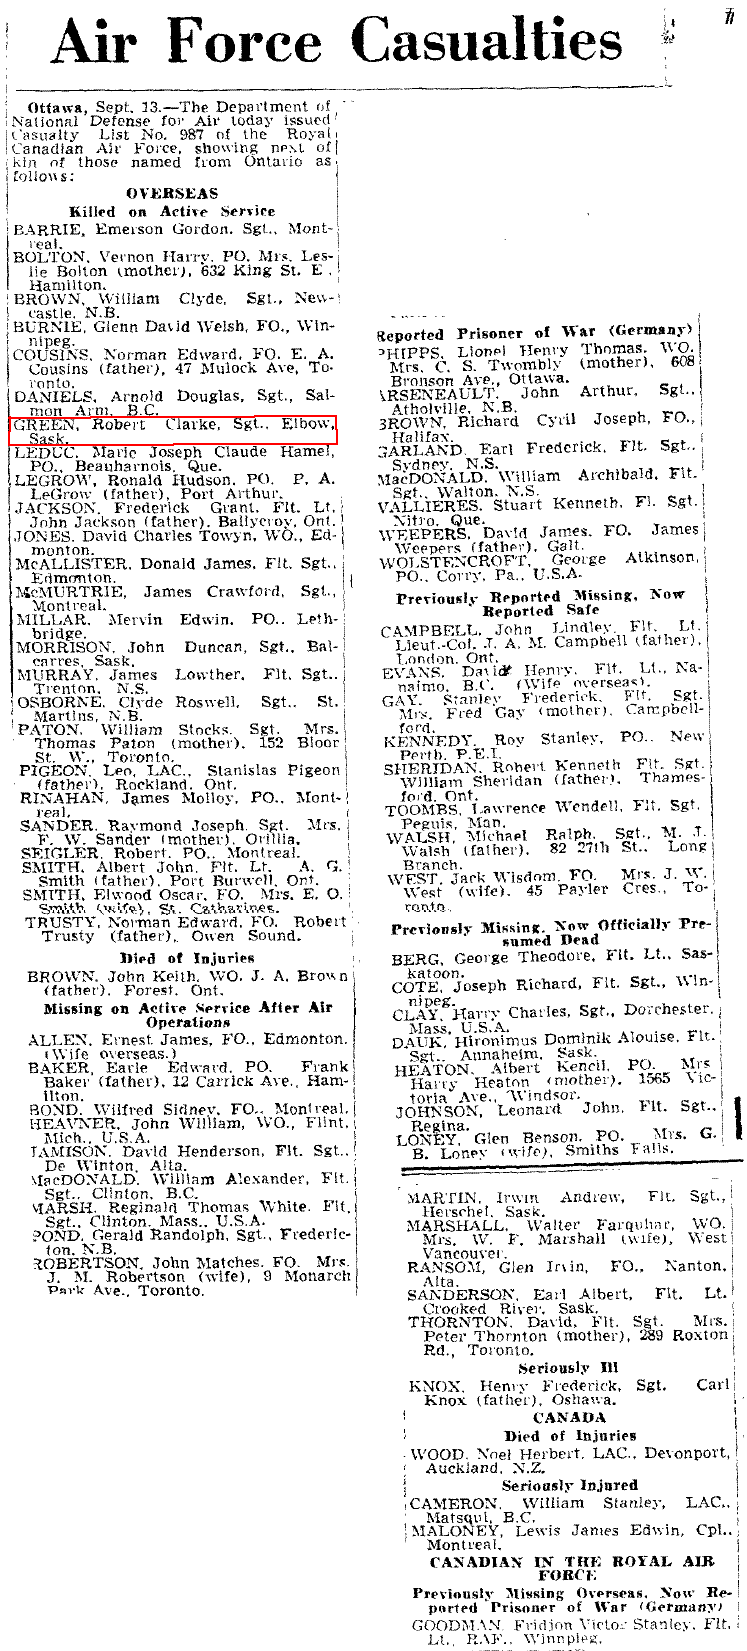 Globe and Mail Sep 14, 1944 Green Class Viii